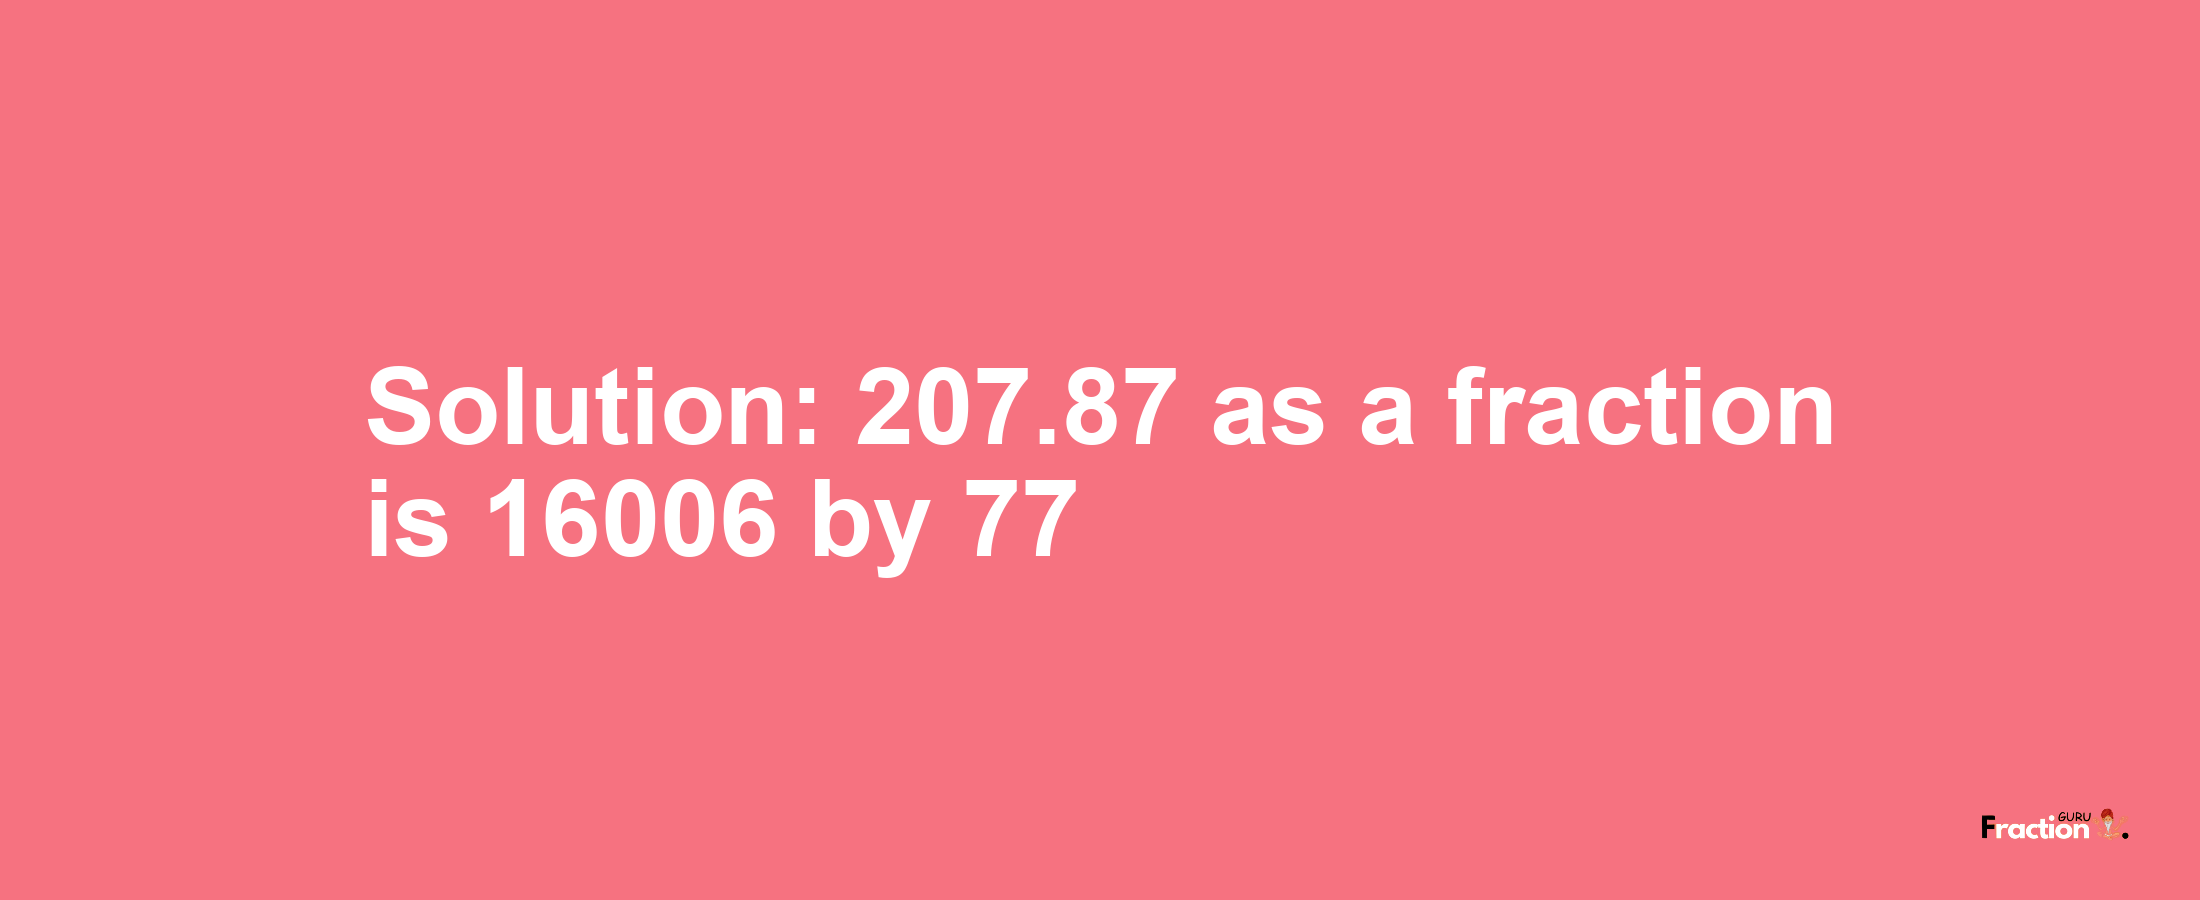 Solution:207.87 as a fraction is 16006/77